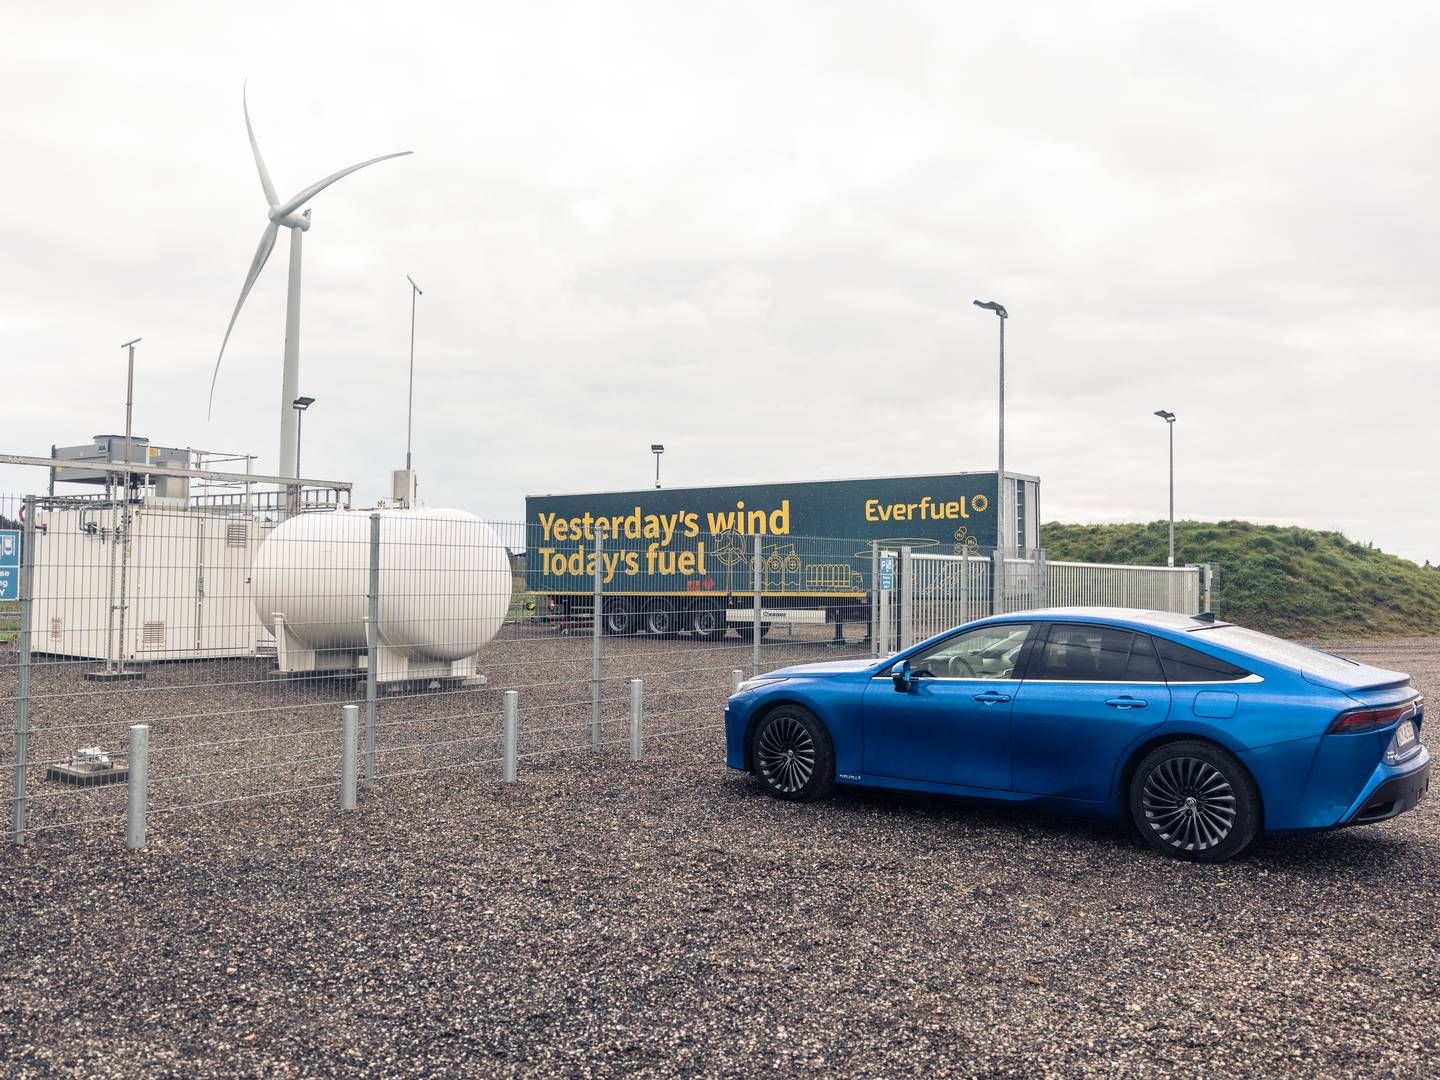 Siemens Gamesa's demonstration plant near Brande, where visitors can see how green hydrogen is produced. Everfuel makes green hydrogen that can be filled directly into the tank of a hydrogen car like this Mirai. | Photo: Anders Holst Pedersen